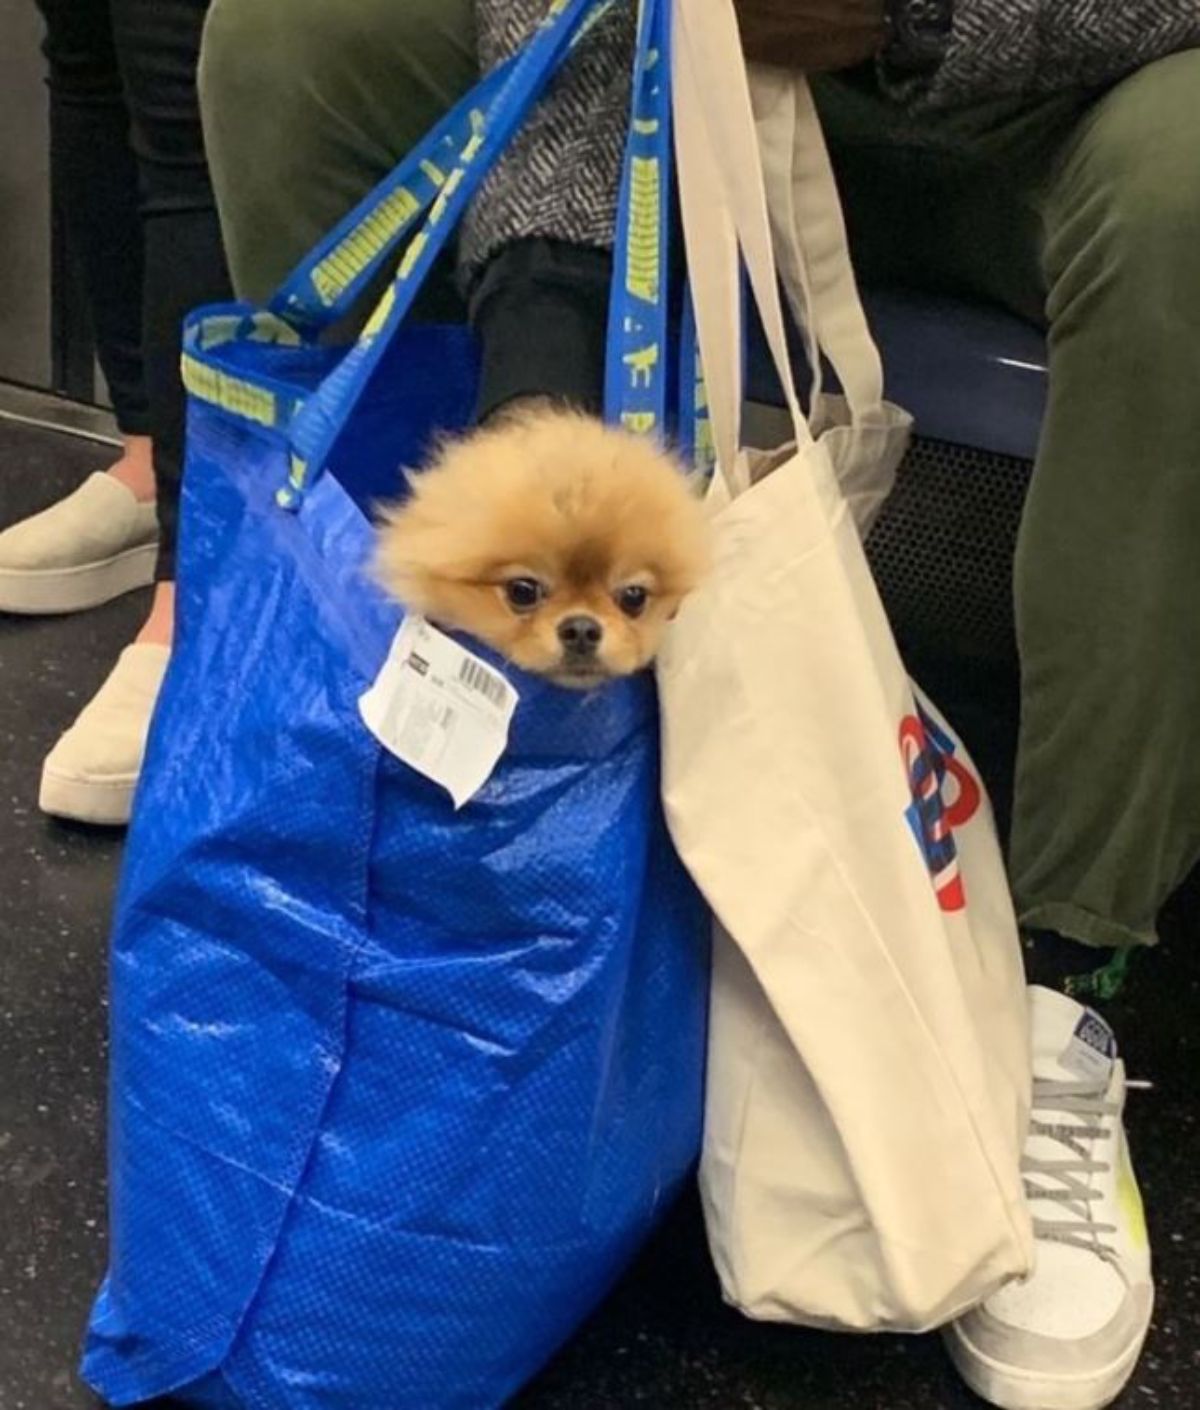 brown fluffy dog in a blue ikea bag on the floor with the dog's head sticking out